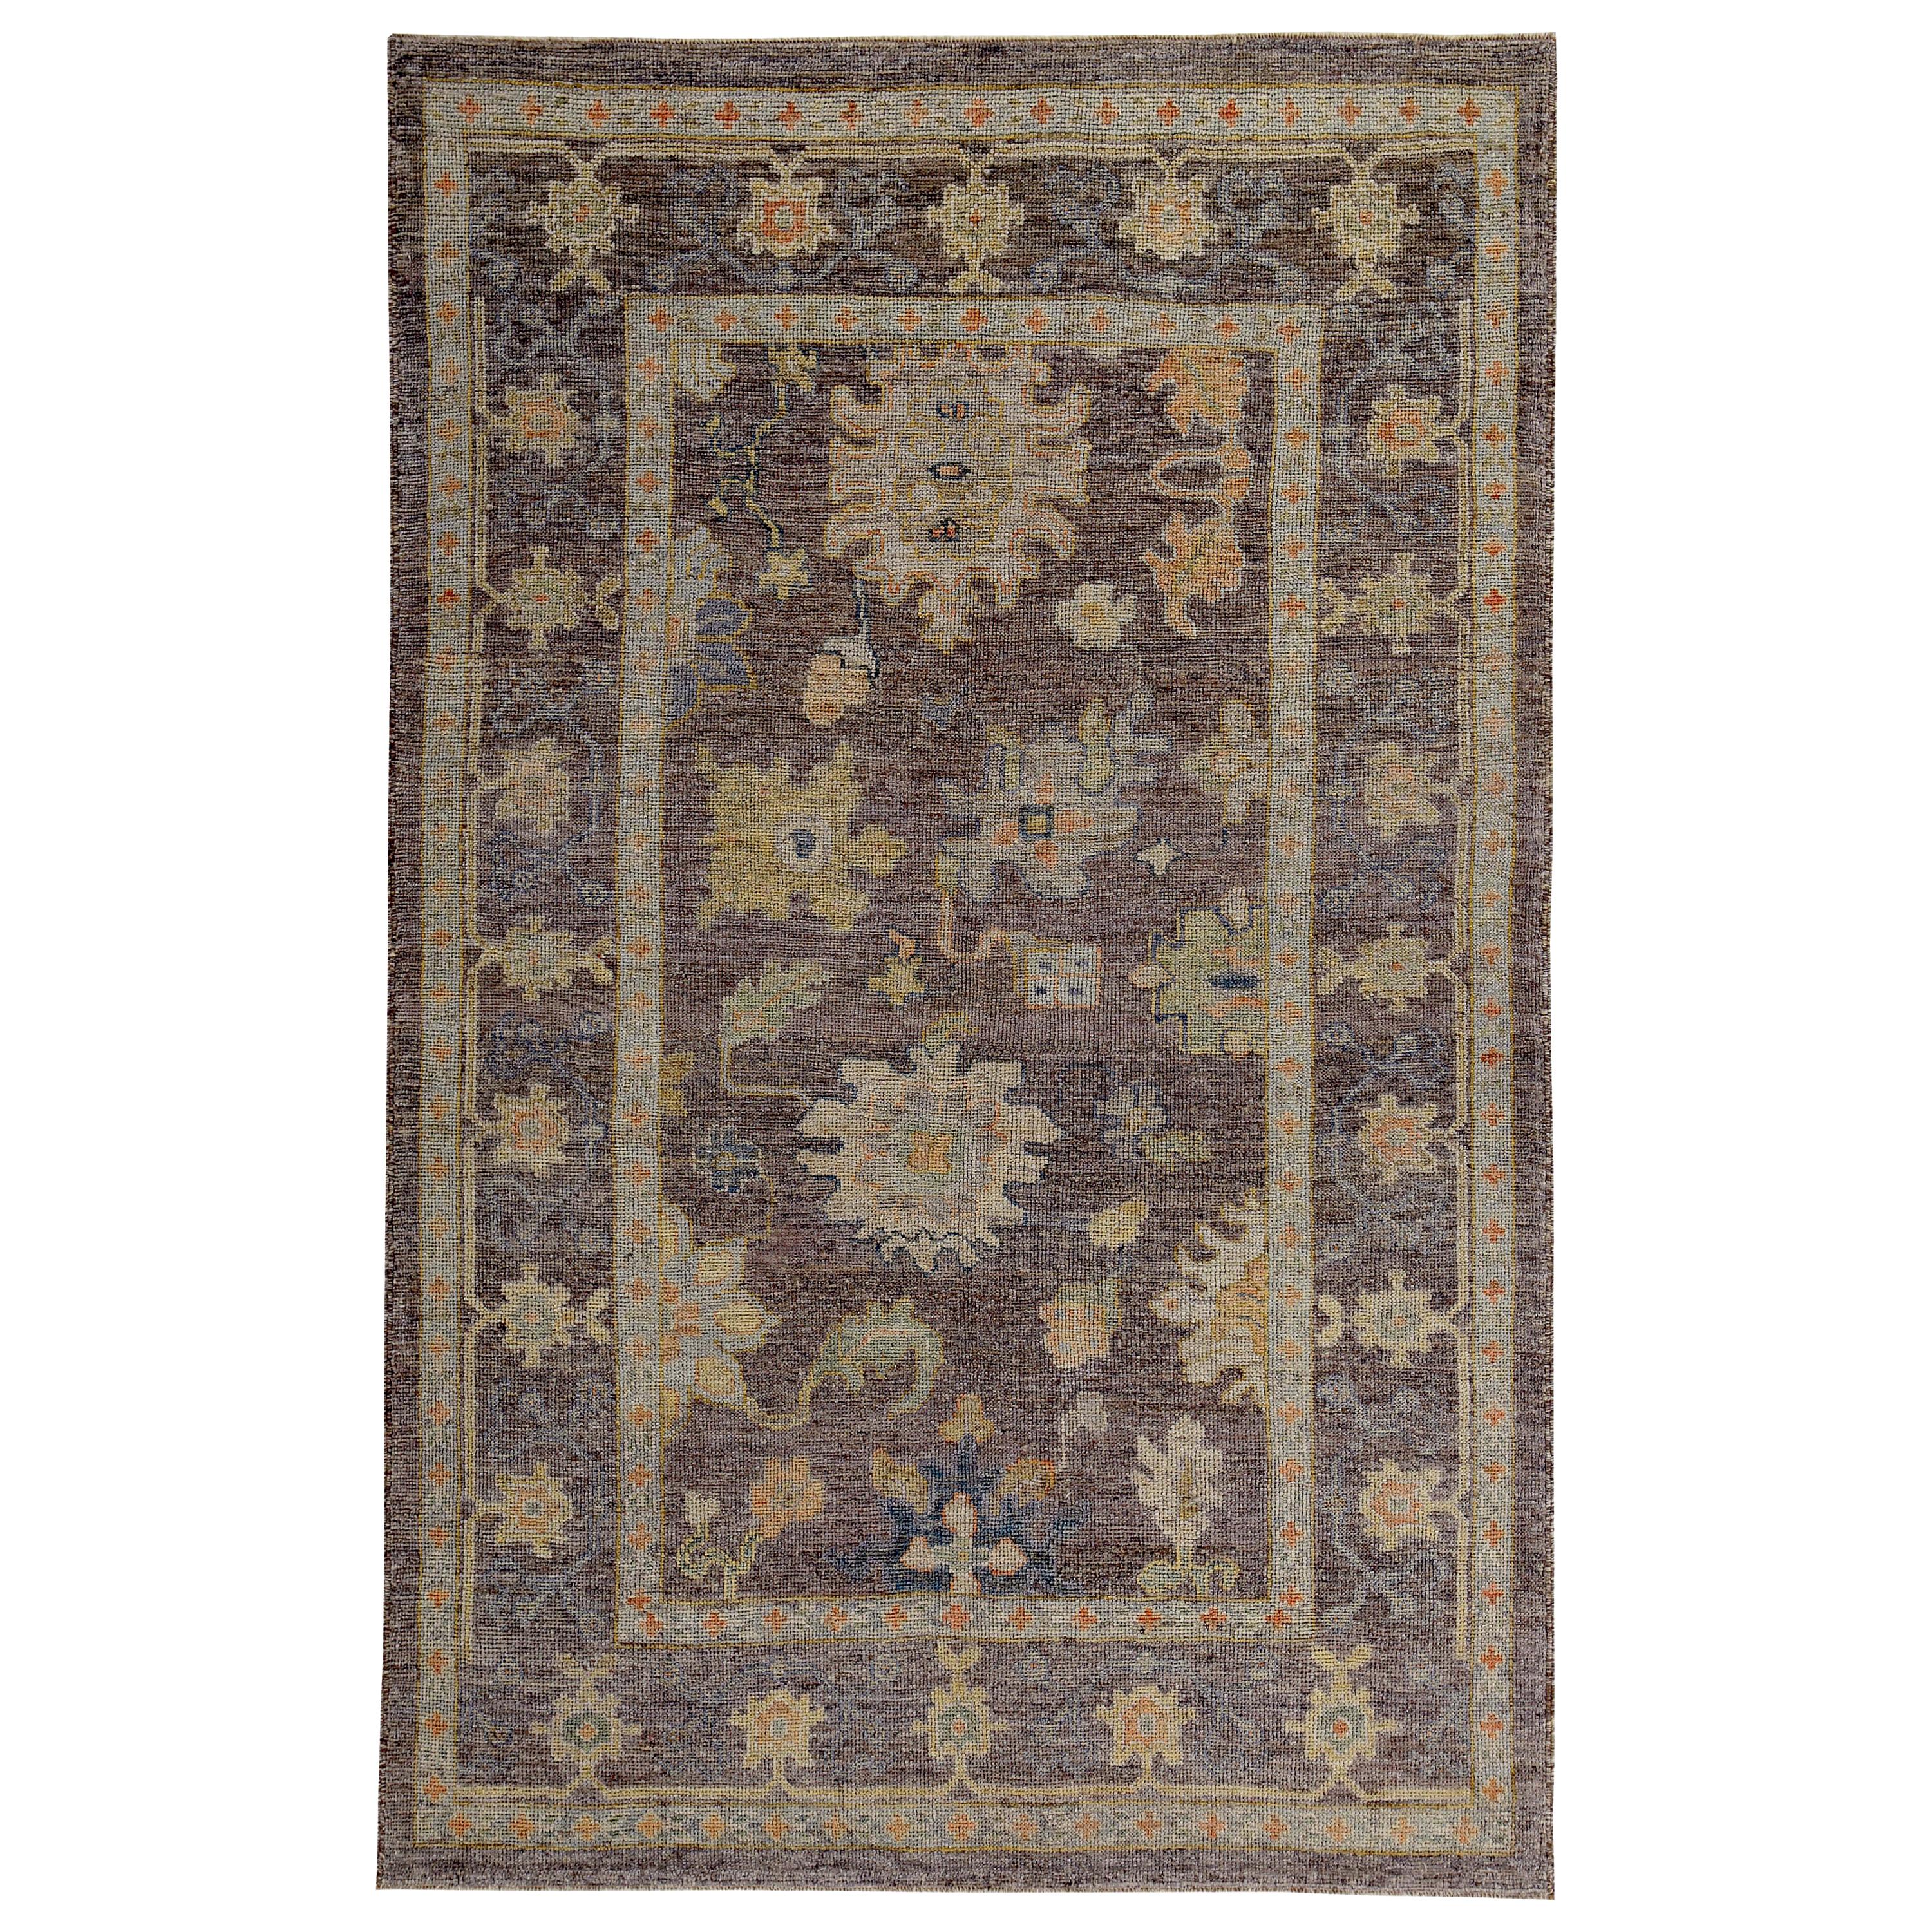 Turkish Oushak Rug with Orange, Green and Blue Flower Heads on Brown Field